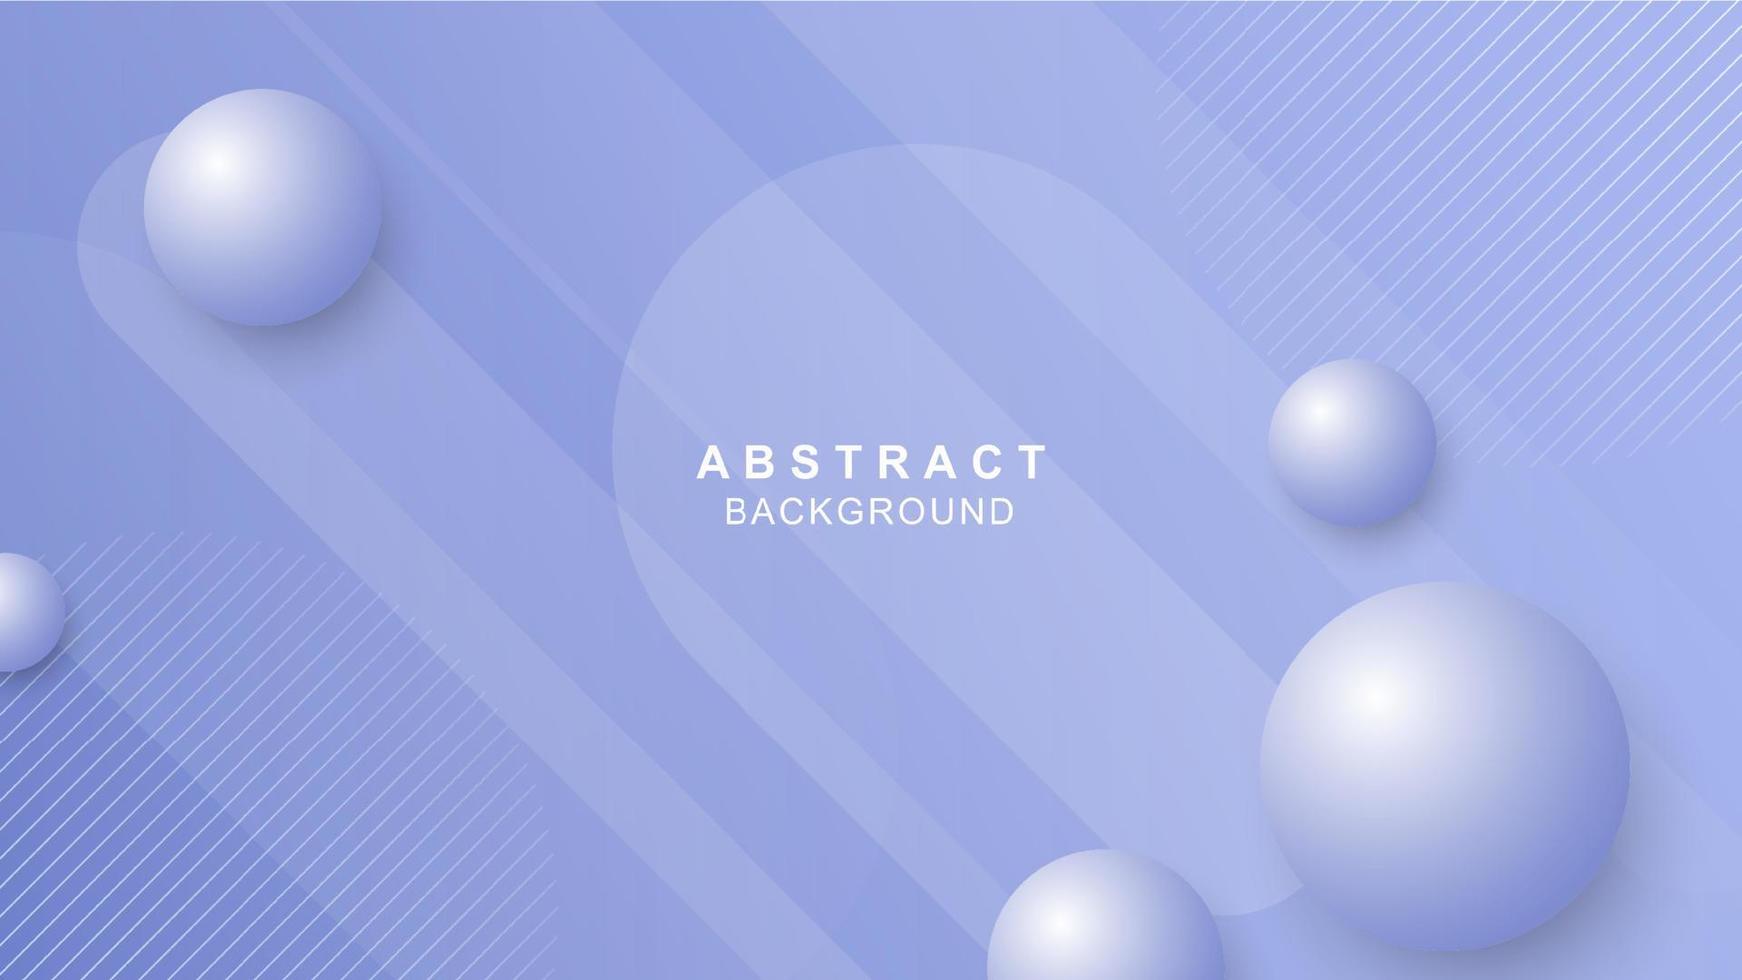 Modern circles background with gradient style vector